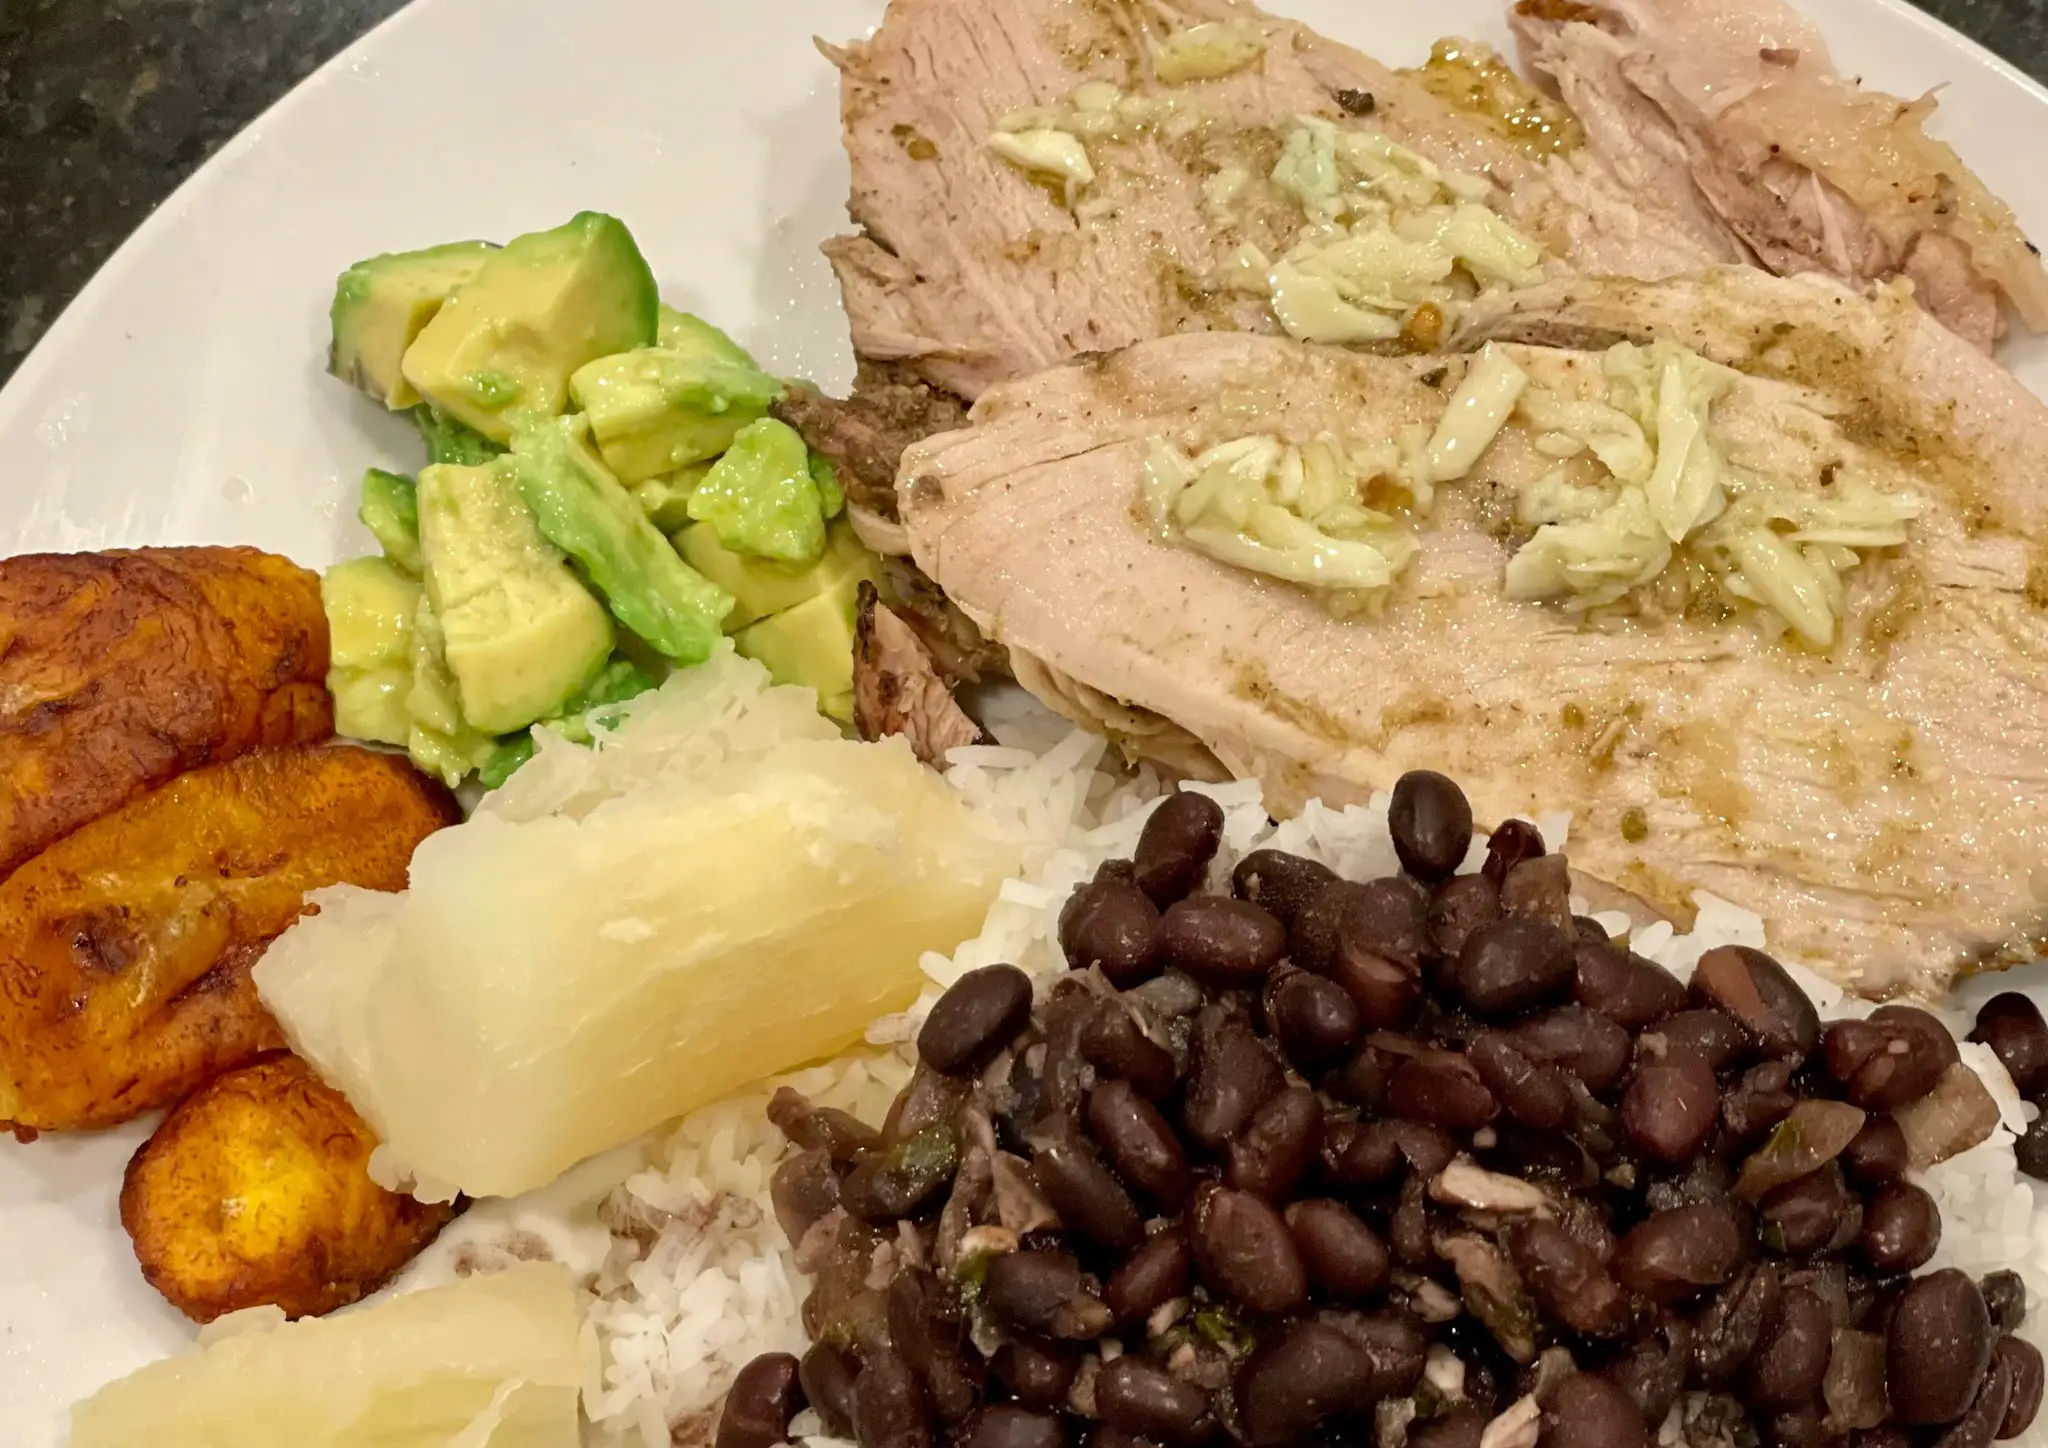 Traditional lechon dinner with lechon, black beans and rice, yuca, maduros and avocado.